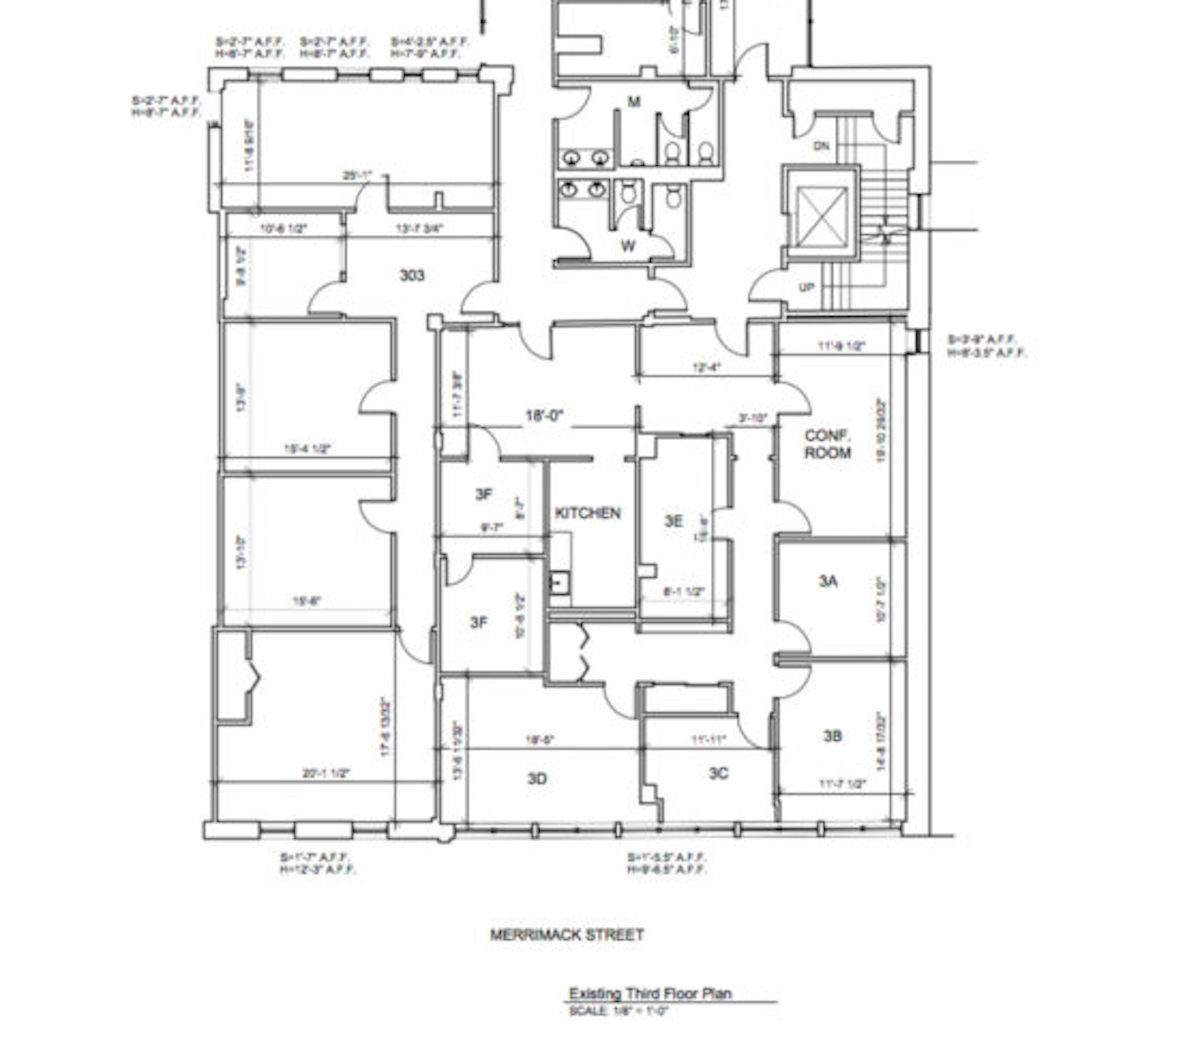 Suite 303 Florr Plan- Executive Office Building in Lowell MA